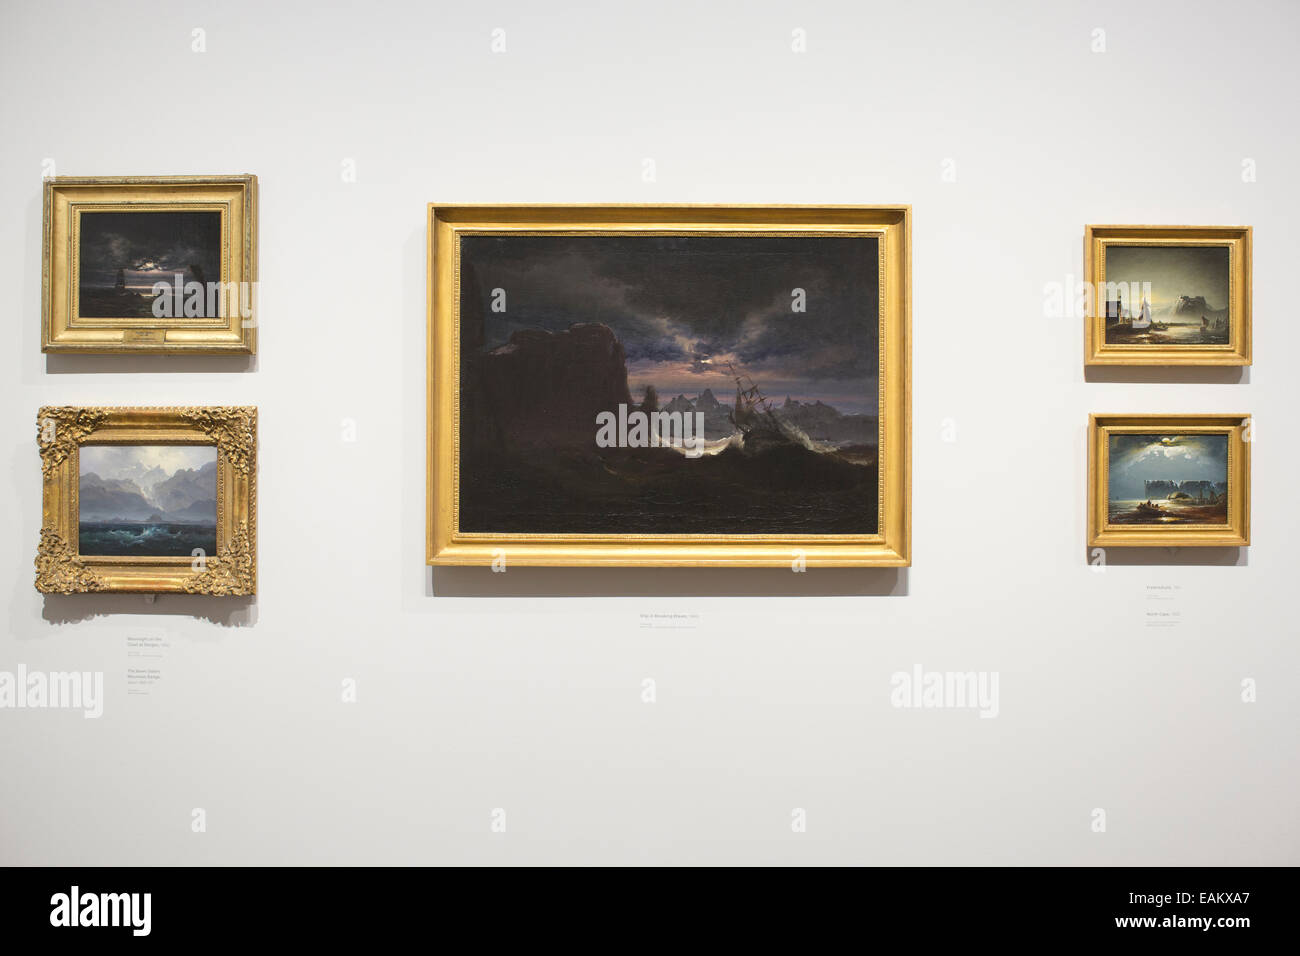 Peder Balke exhibition National Gallery, London, UK 11th November 2014.  (left to right) 'Moonlight on the Coast at Steigen', 1842, oil on canvas, 'The Seven Sisters Mountain Range' about 1845-50, 'Ship in Breaking Waves' 1840's, 'Fredrikshald' 1852, and 'North Cape' 1852. Peder Balke is among the most pioneering painters of 19th-century Scandinavia. Credit:  Jeff Gilbert/Alamy Live News Stock Photo